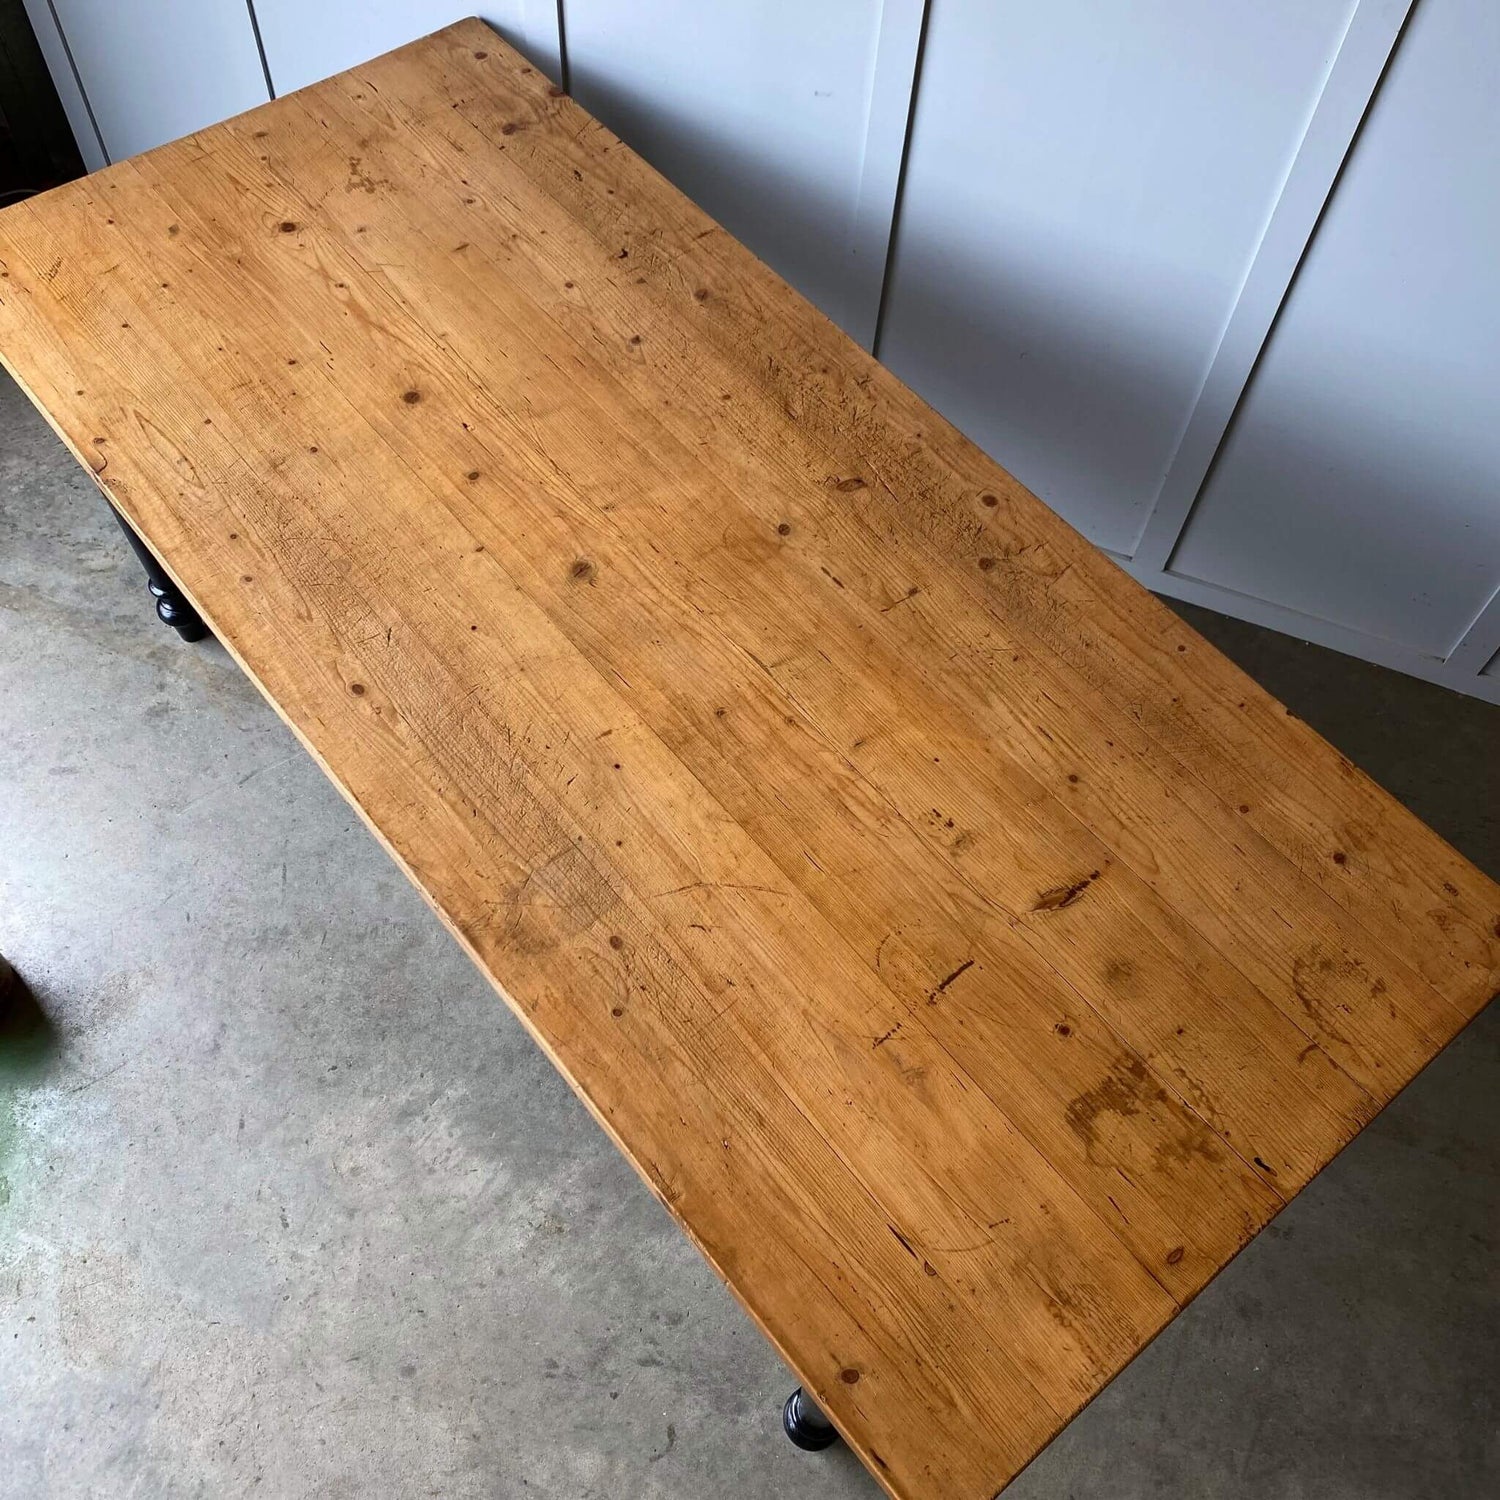 Antique dining table top